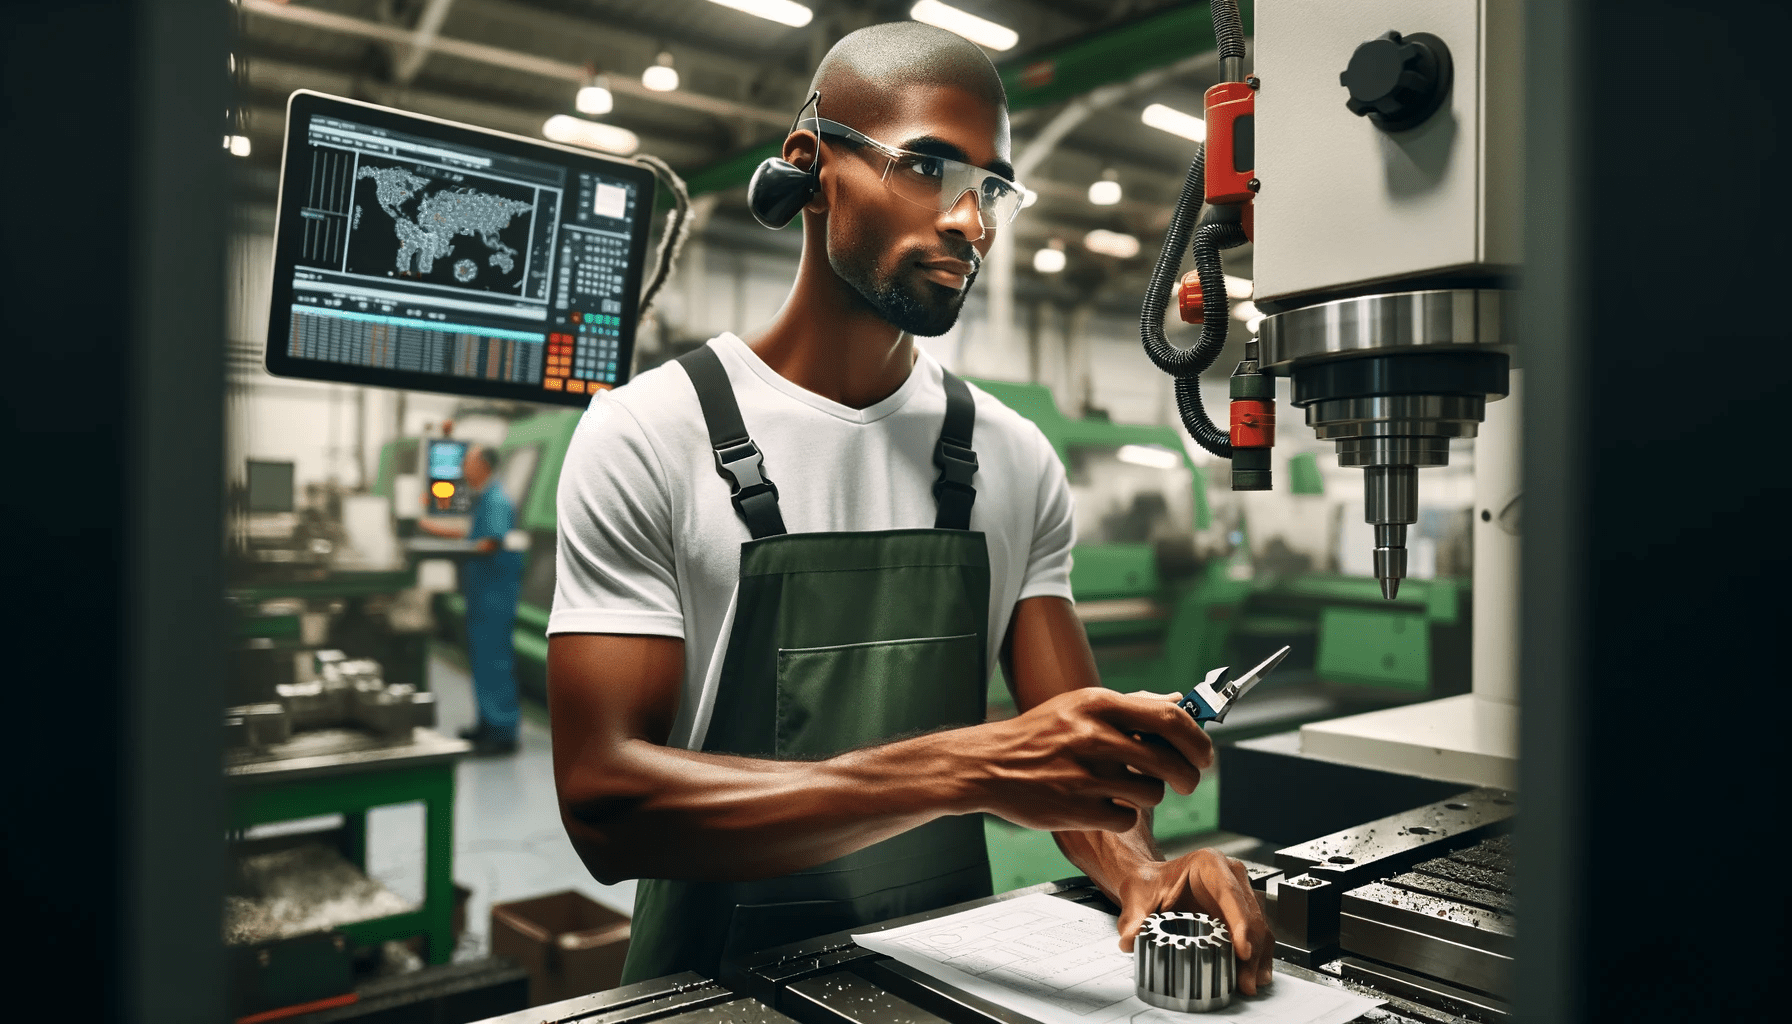 CNC machinist of Black descent, in his 50s, with a shaved head, working in a CNC manufacturing area. He is wearing a green work apron